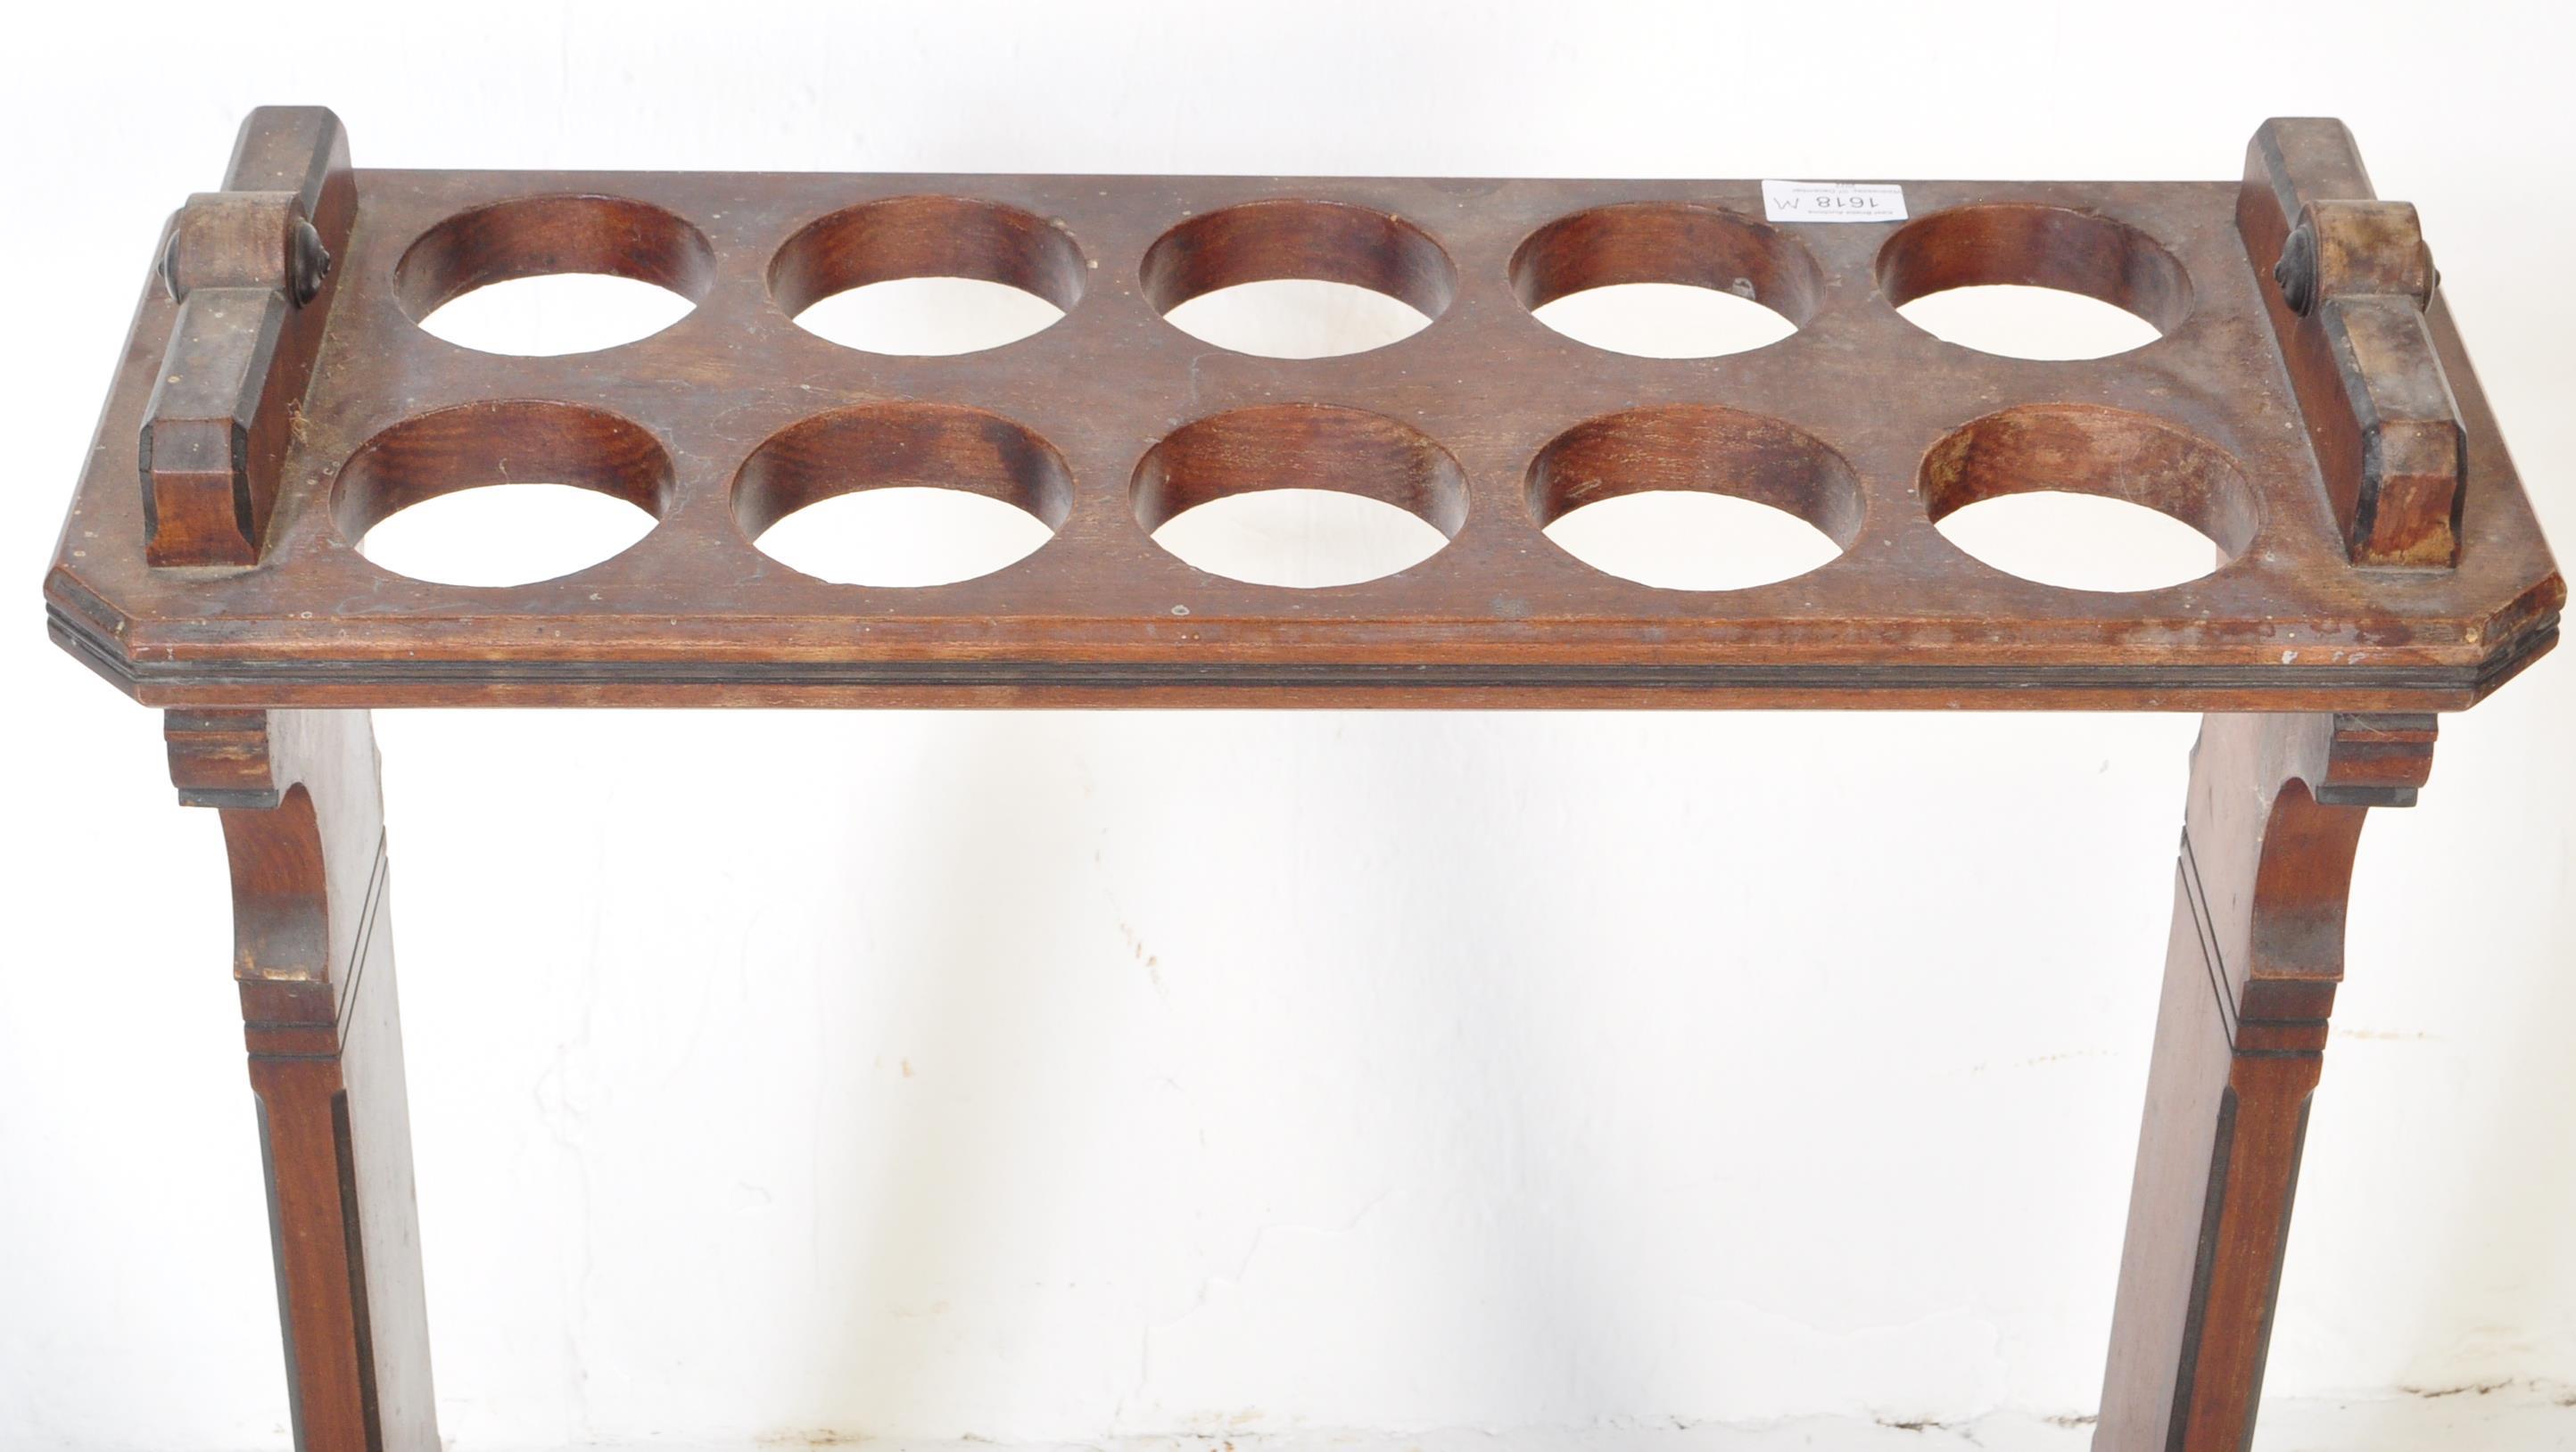 VICTORIAN 19TH CENTURY MAHOGANY AESTHETIC MOVEMENT STAND - Image 3 of 6